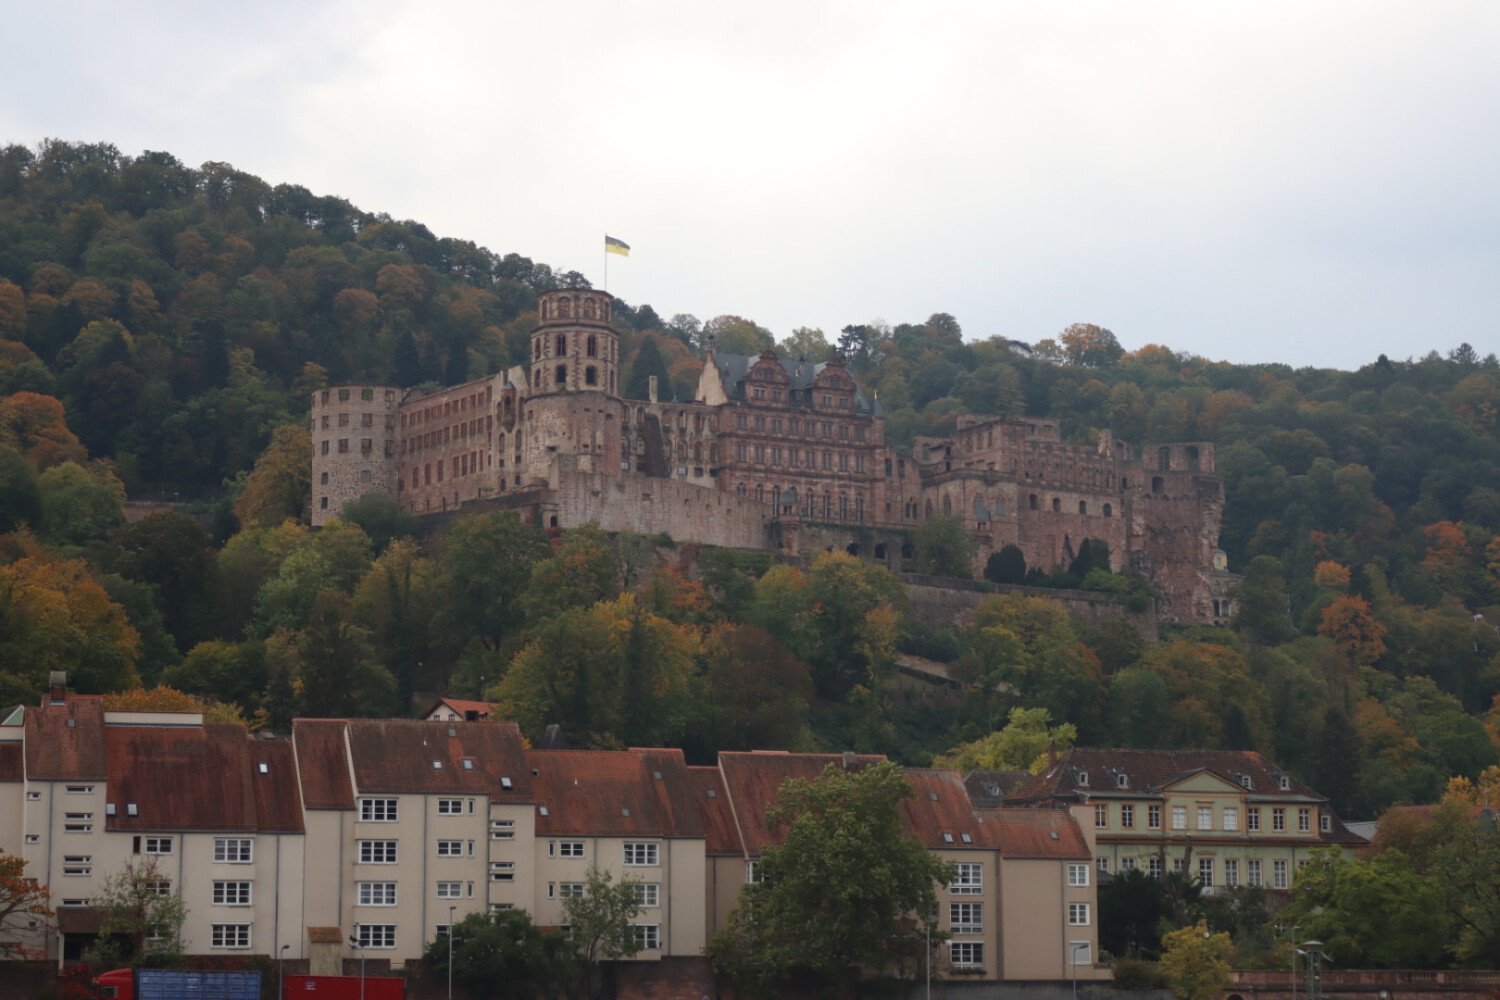 The castle of Heidelberg seen from the other side of the river Neckar.